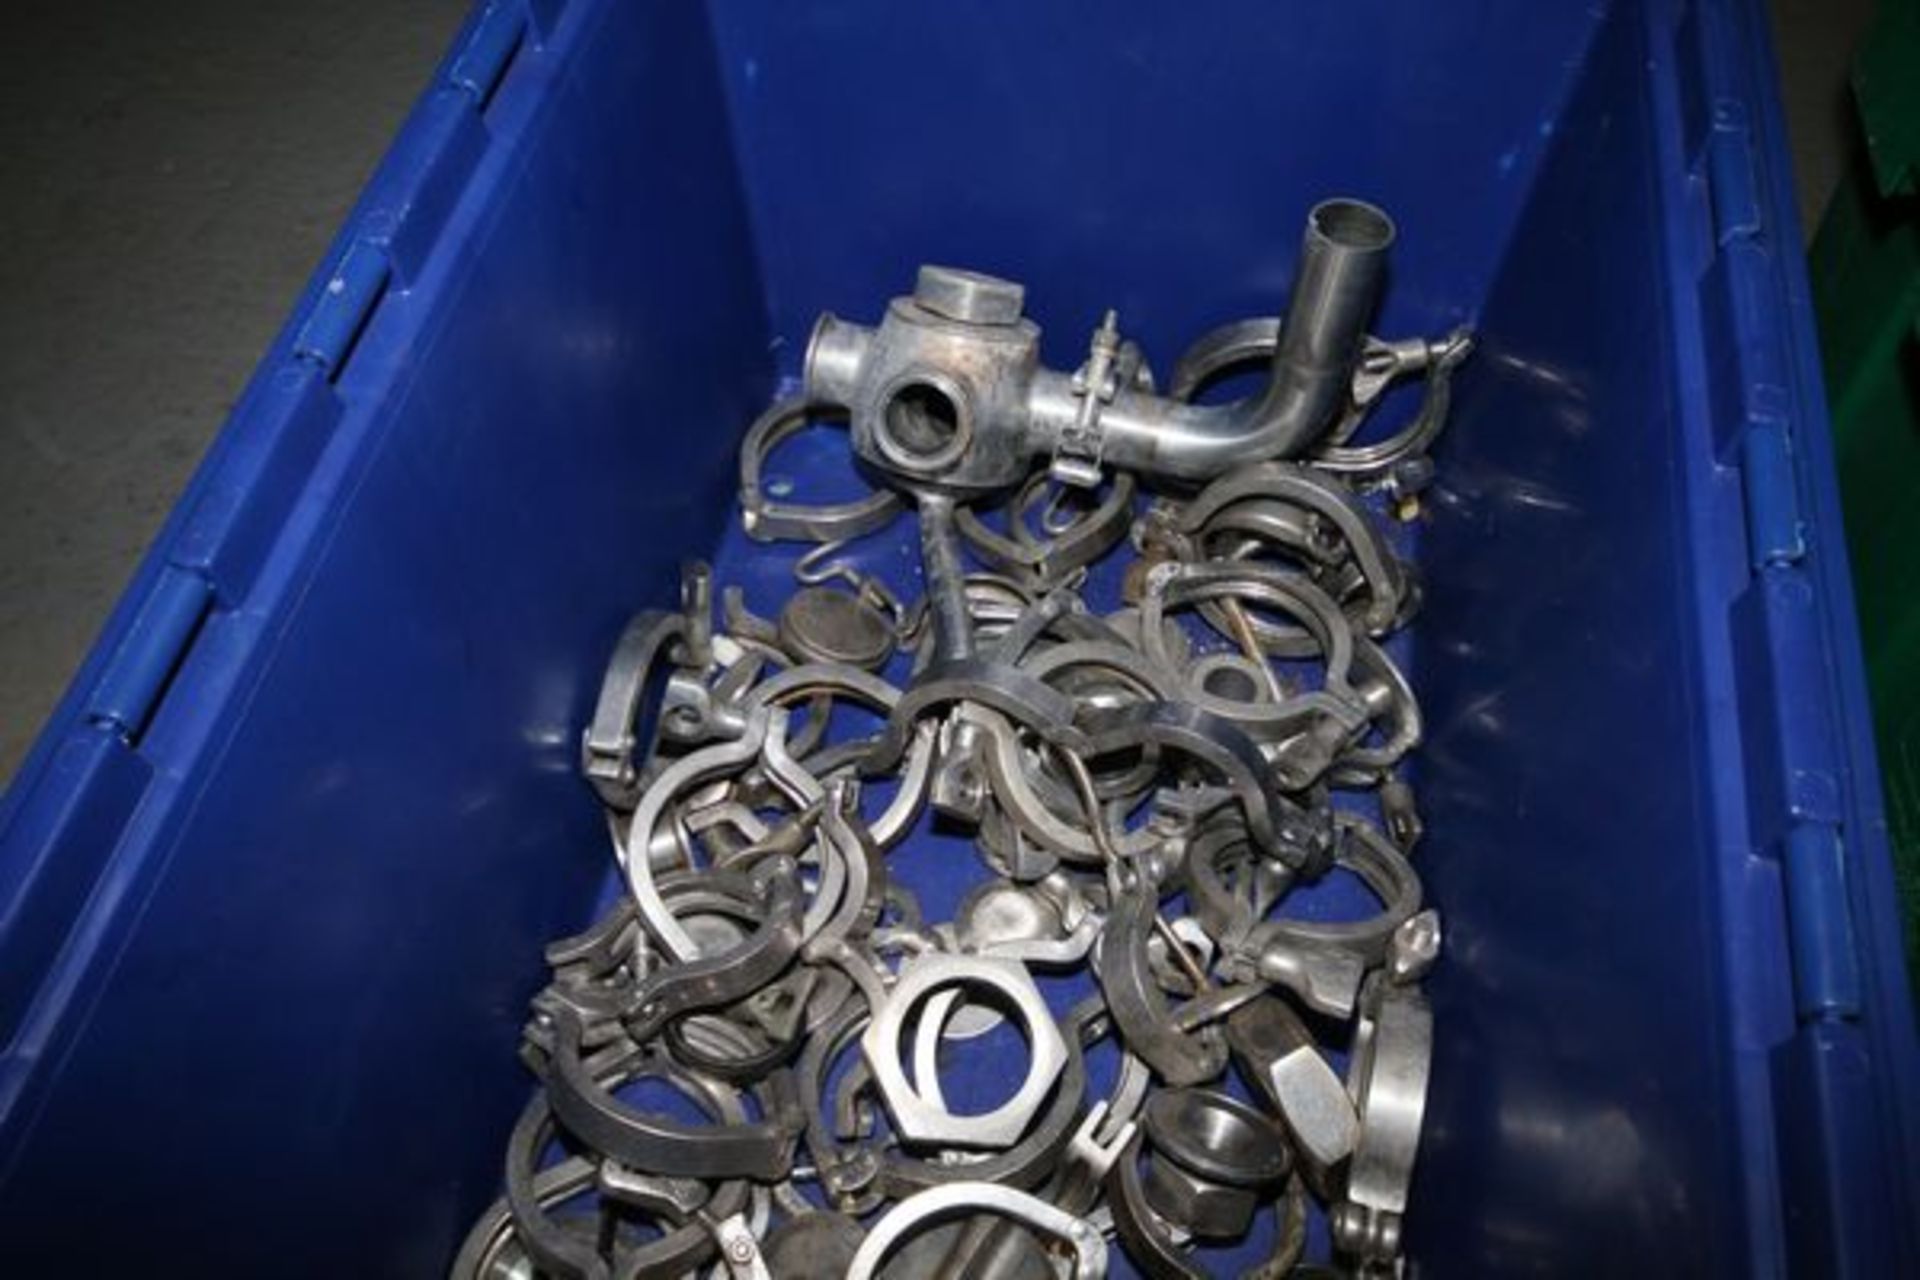 Lot of Assorted S/S Fittings, Including Clamps, Plugg Valves, and Other Fittings - Image 2 of 2